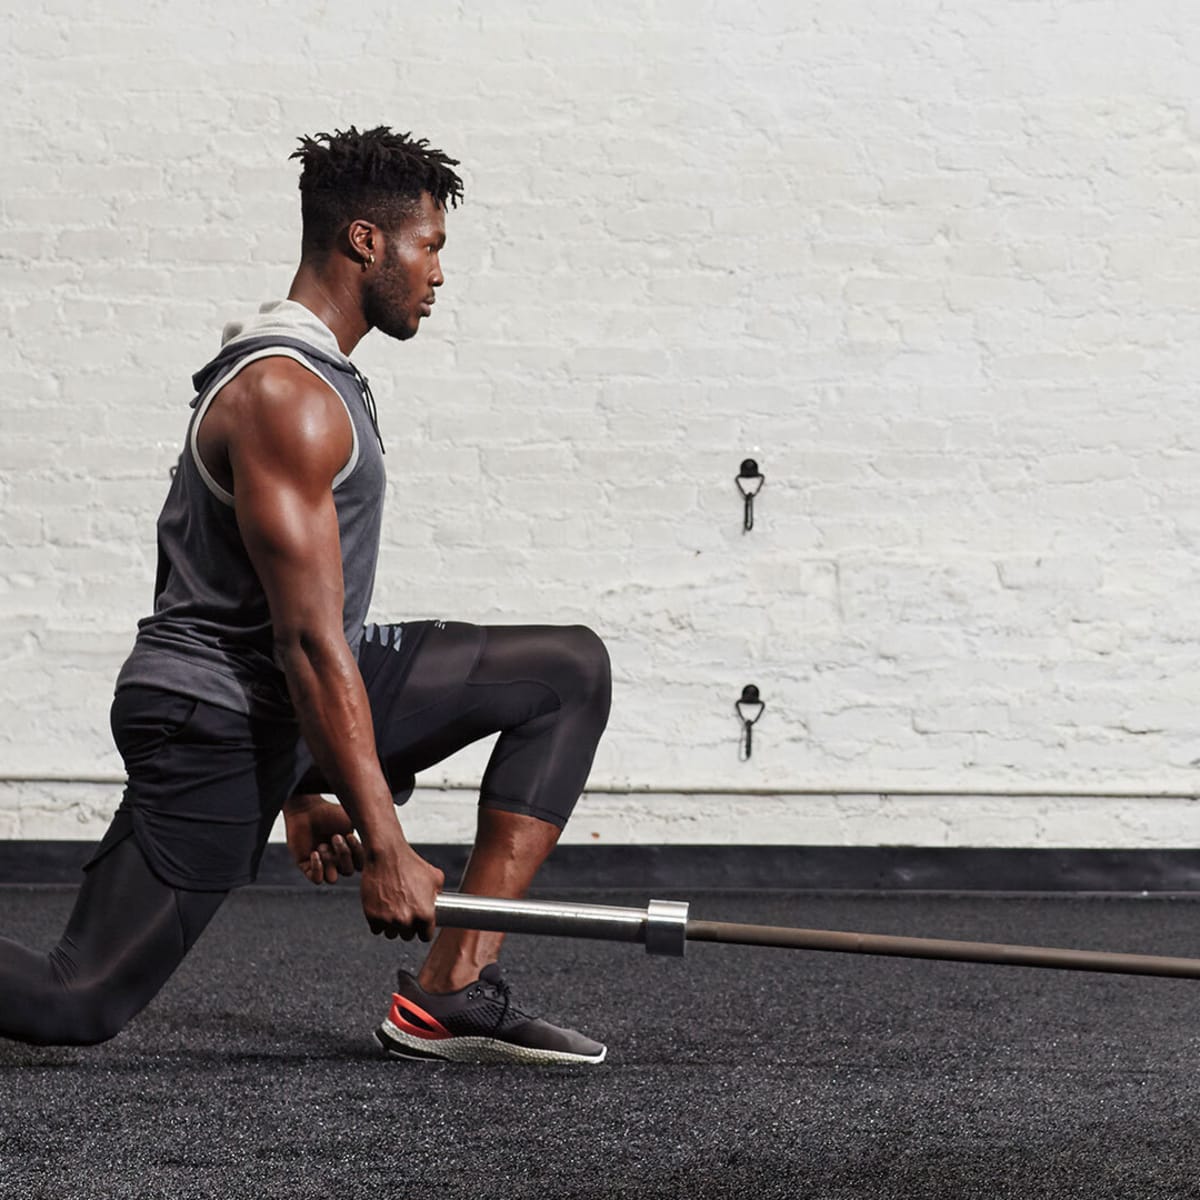 15 Best Lunge Variations to Strengthen Your Legs